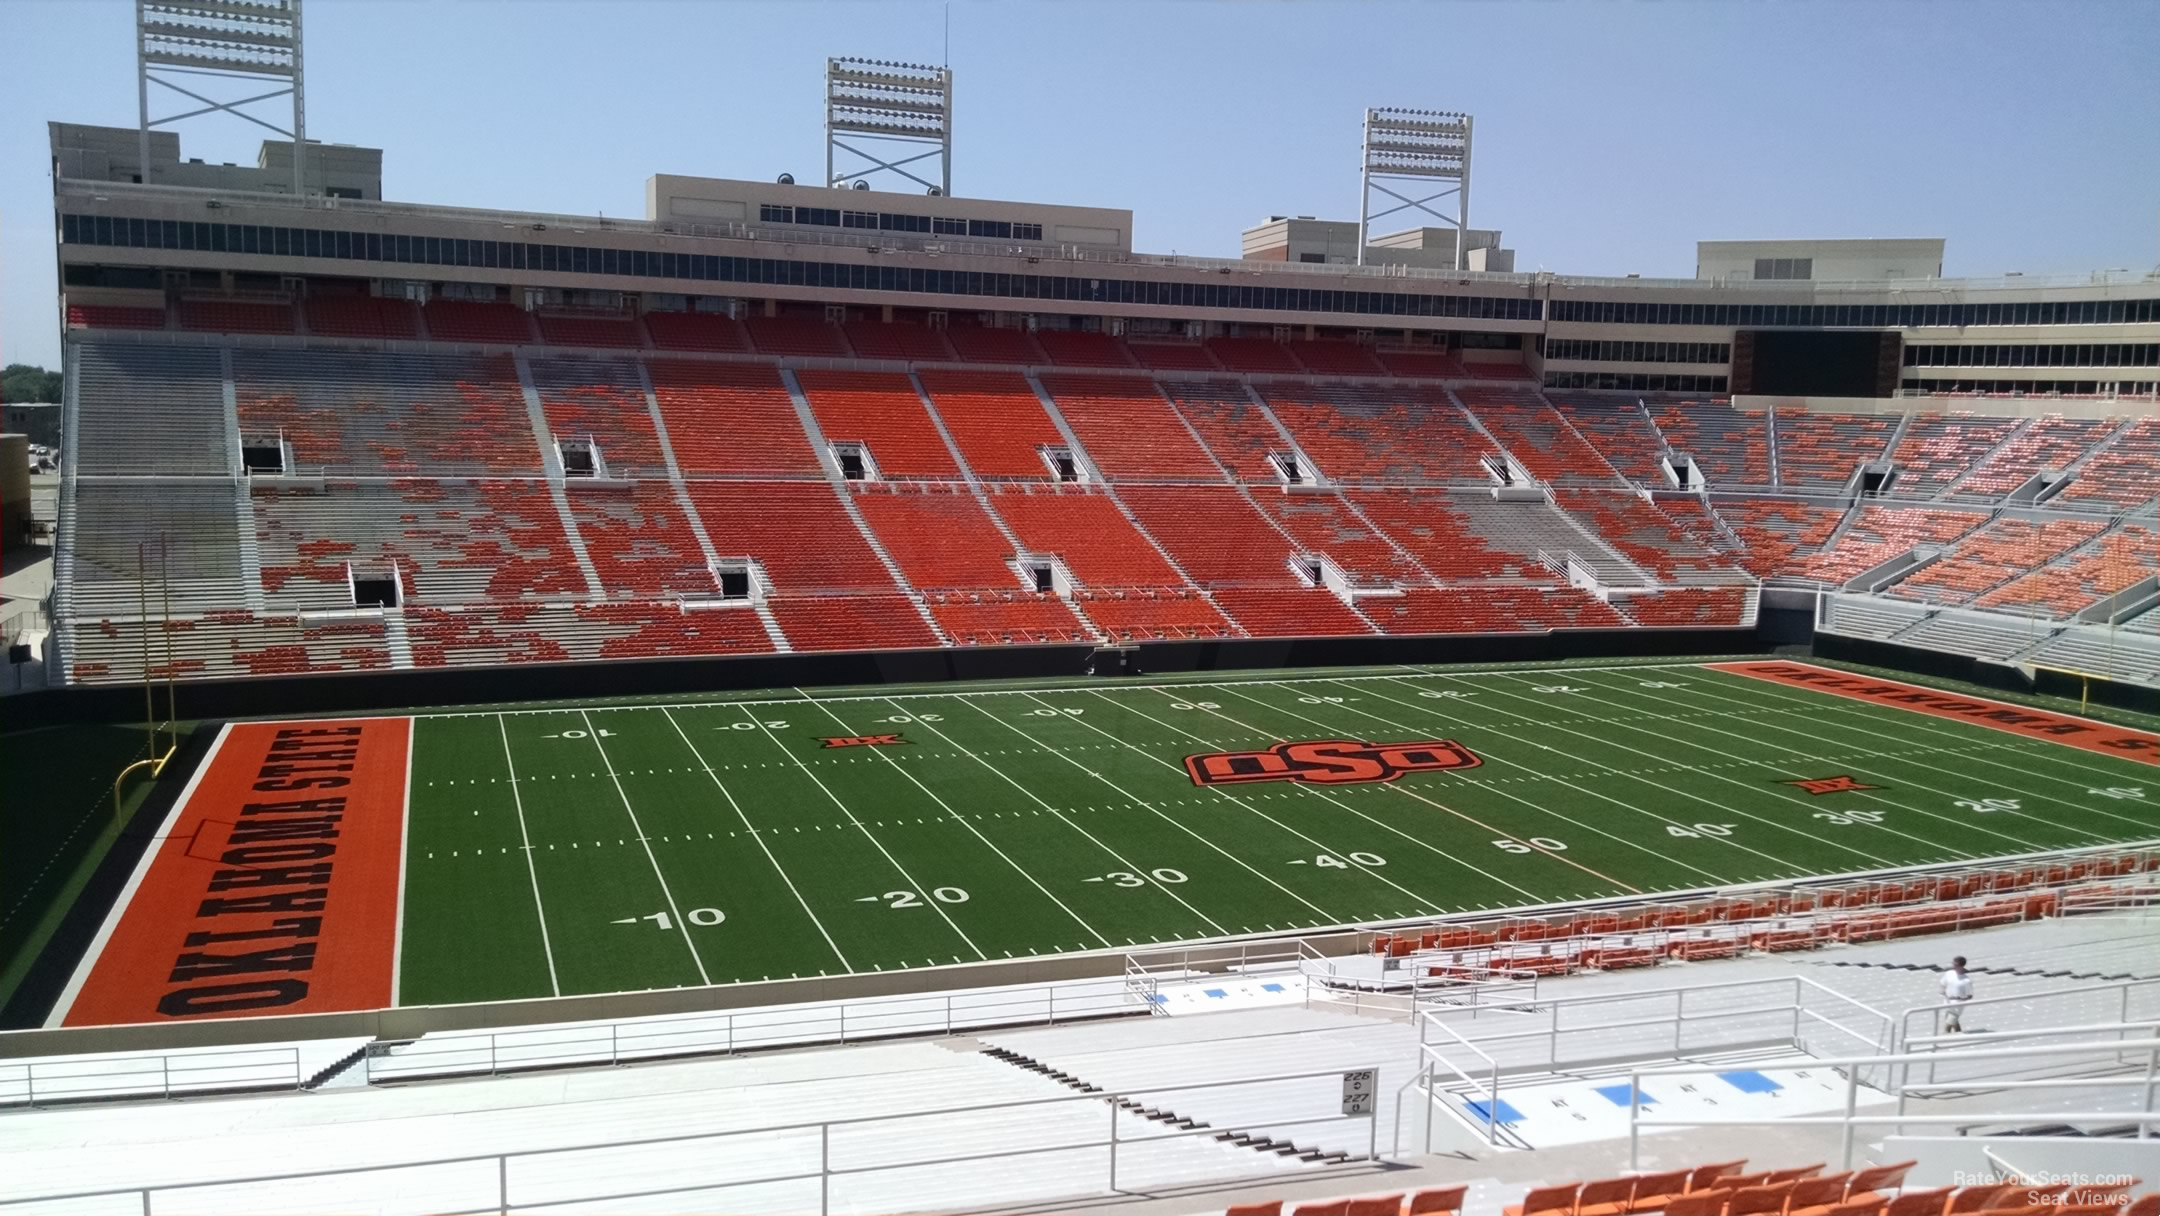 section 333, row 19 seat view  - boone pickens stadium